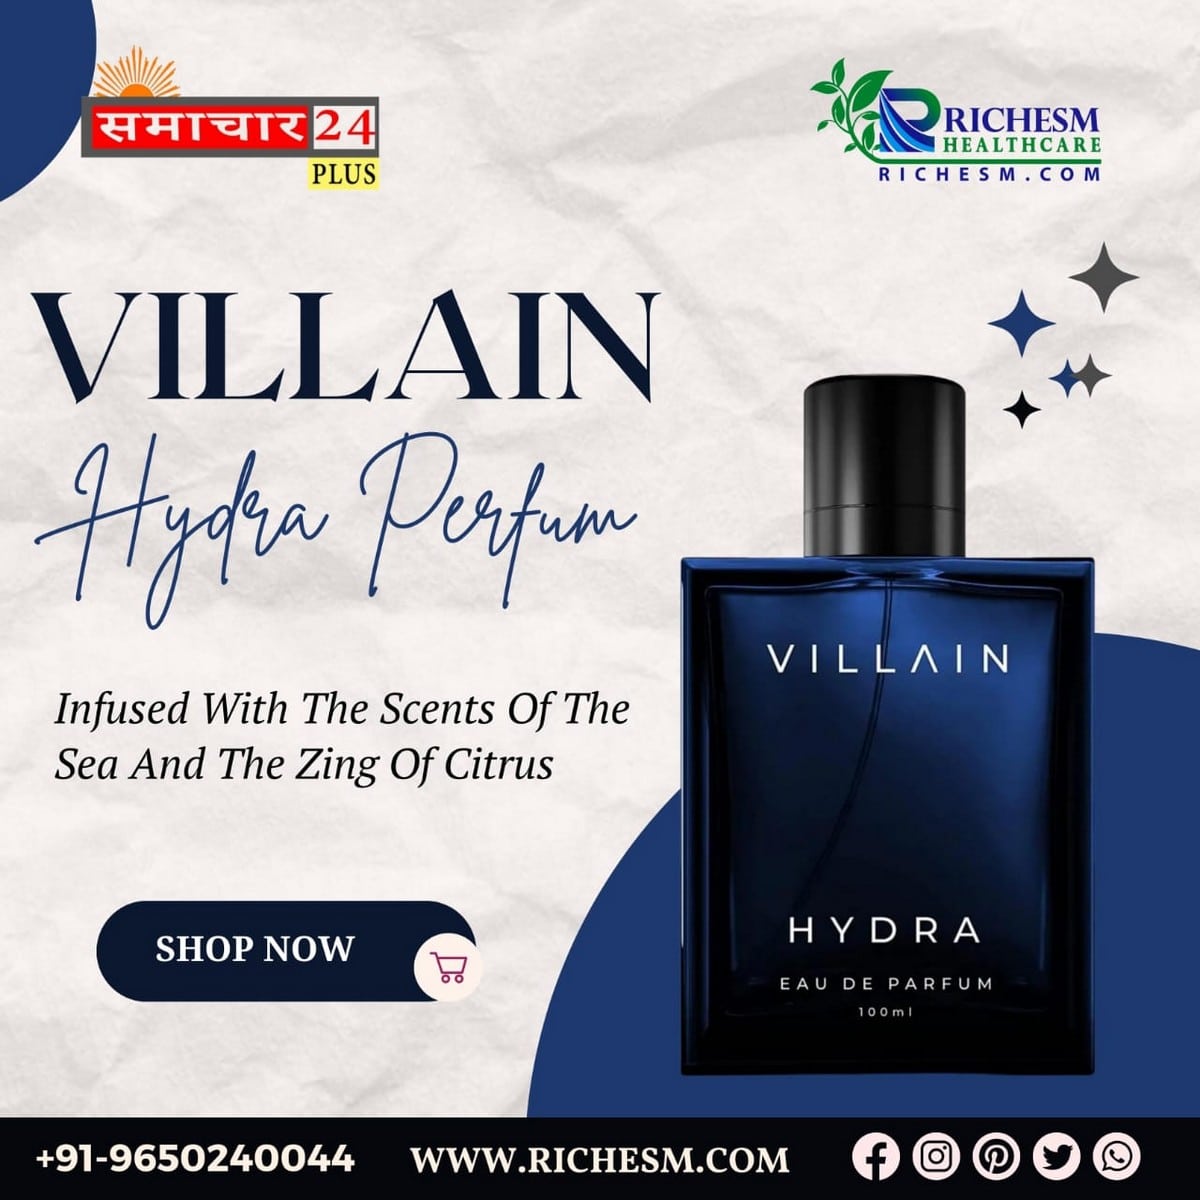 Villain Hydra Perfume Is Available At RichesM